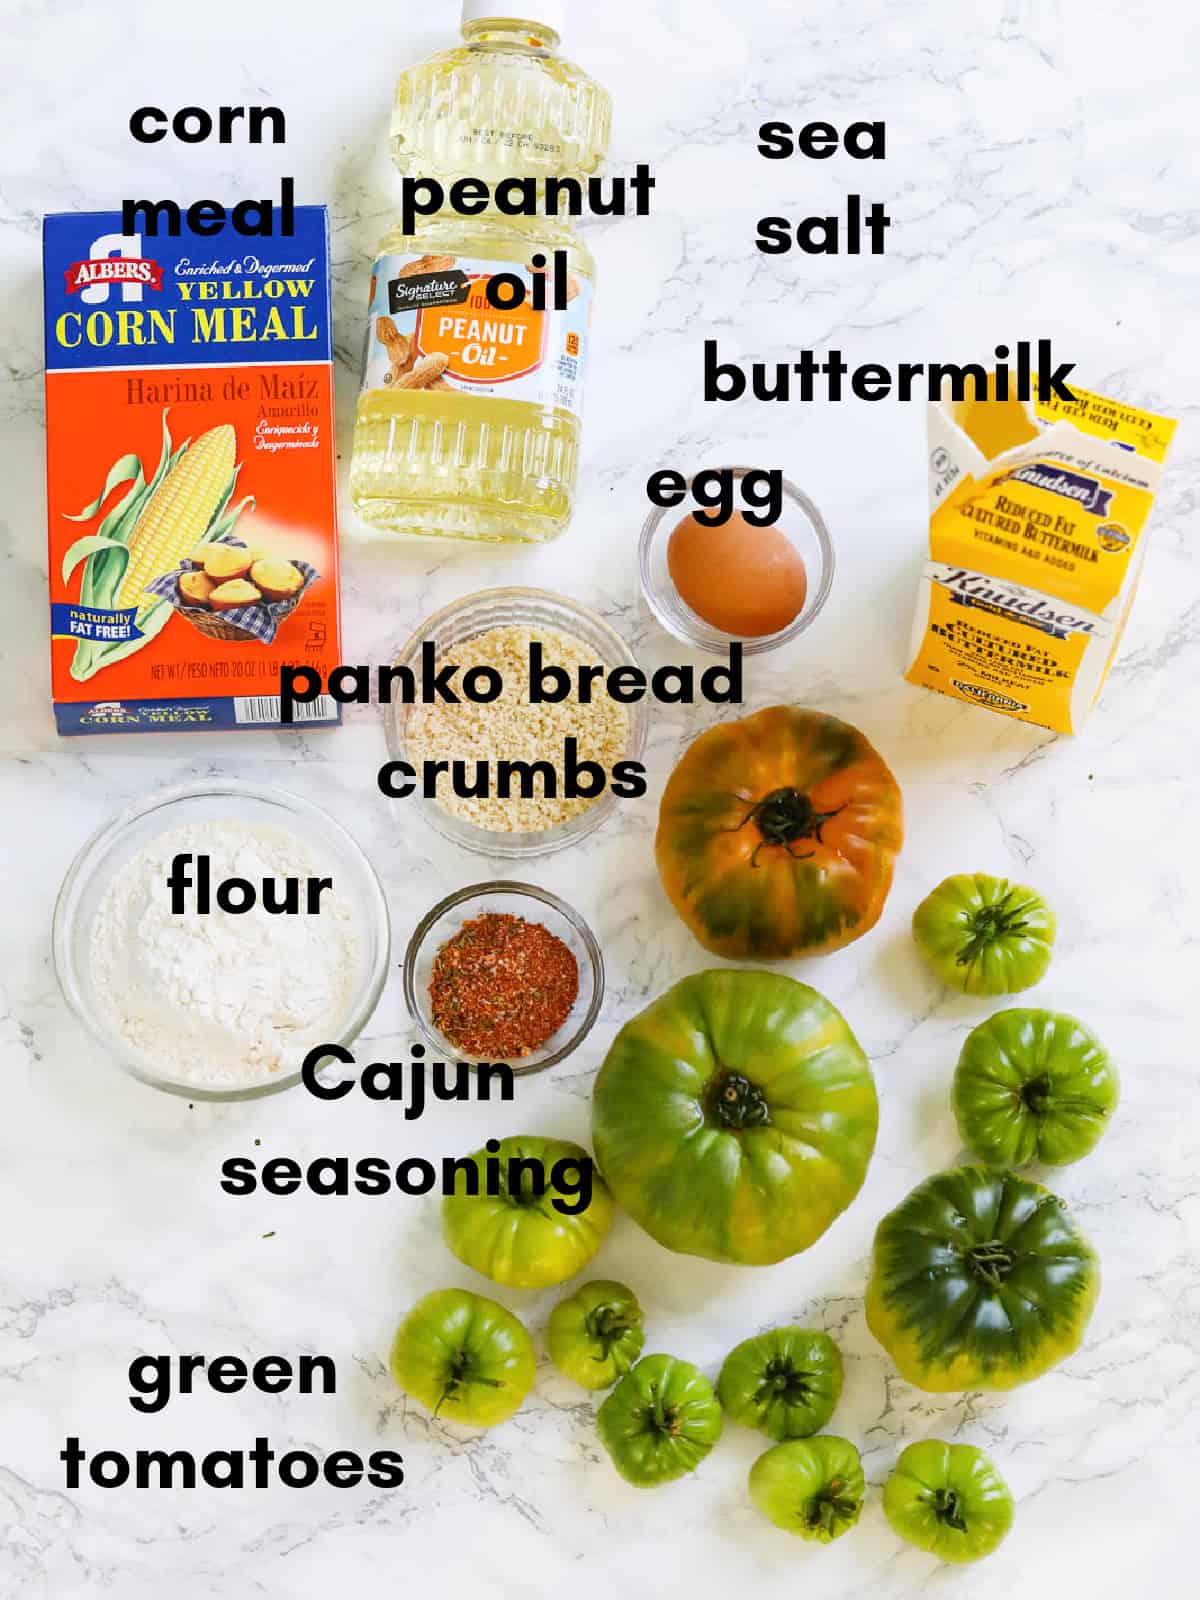 A white marble counter with ingredients including green tomatoes and bread crumbs to make fried green tomatoes.